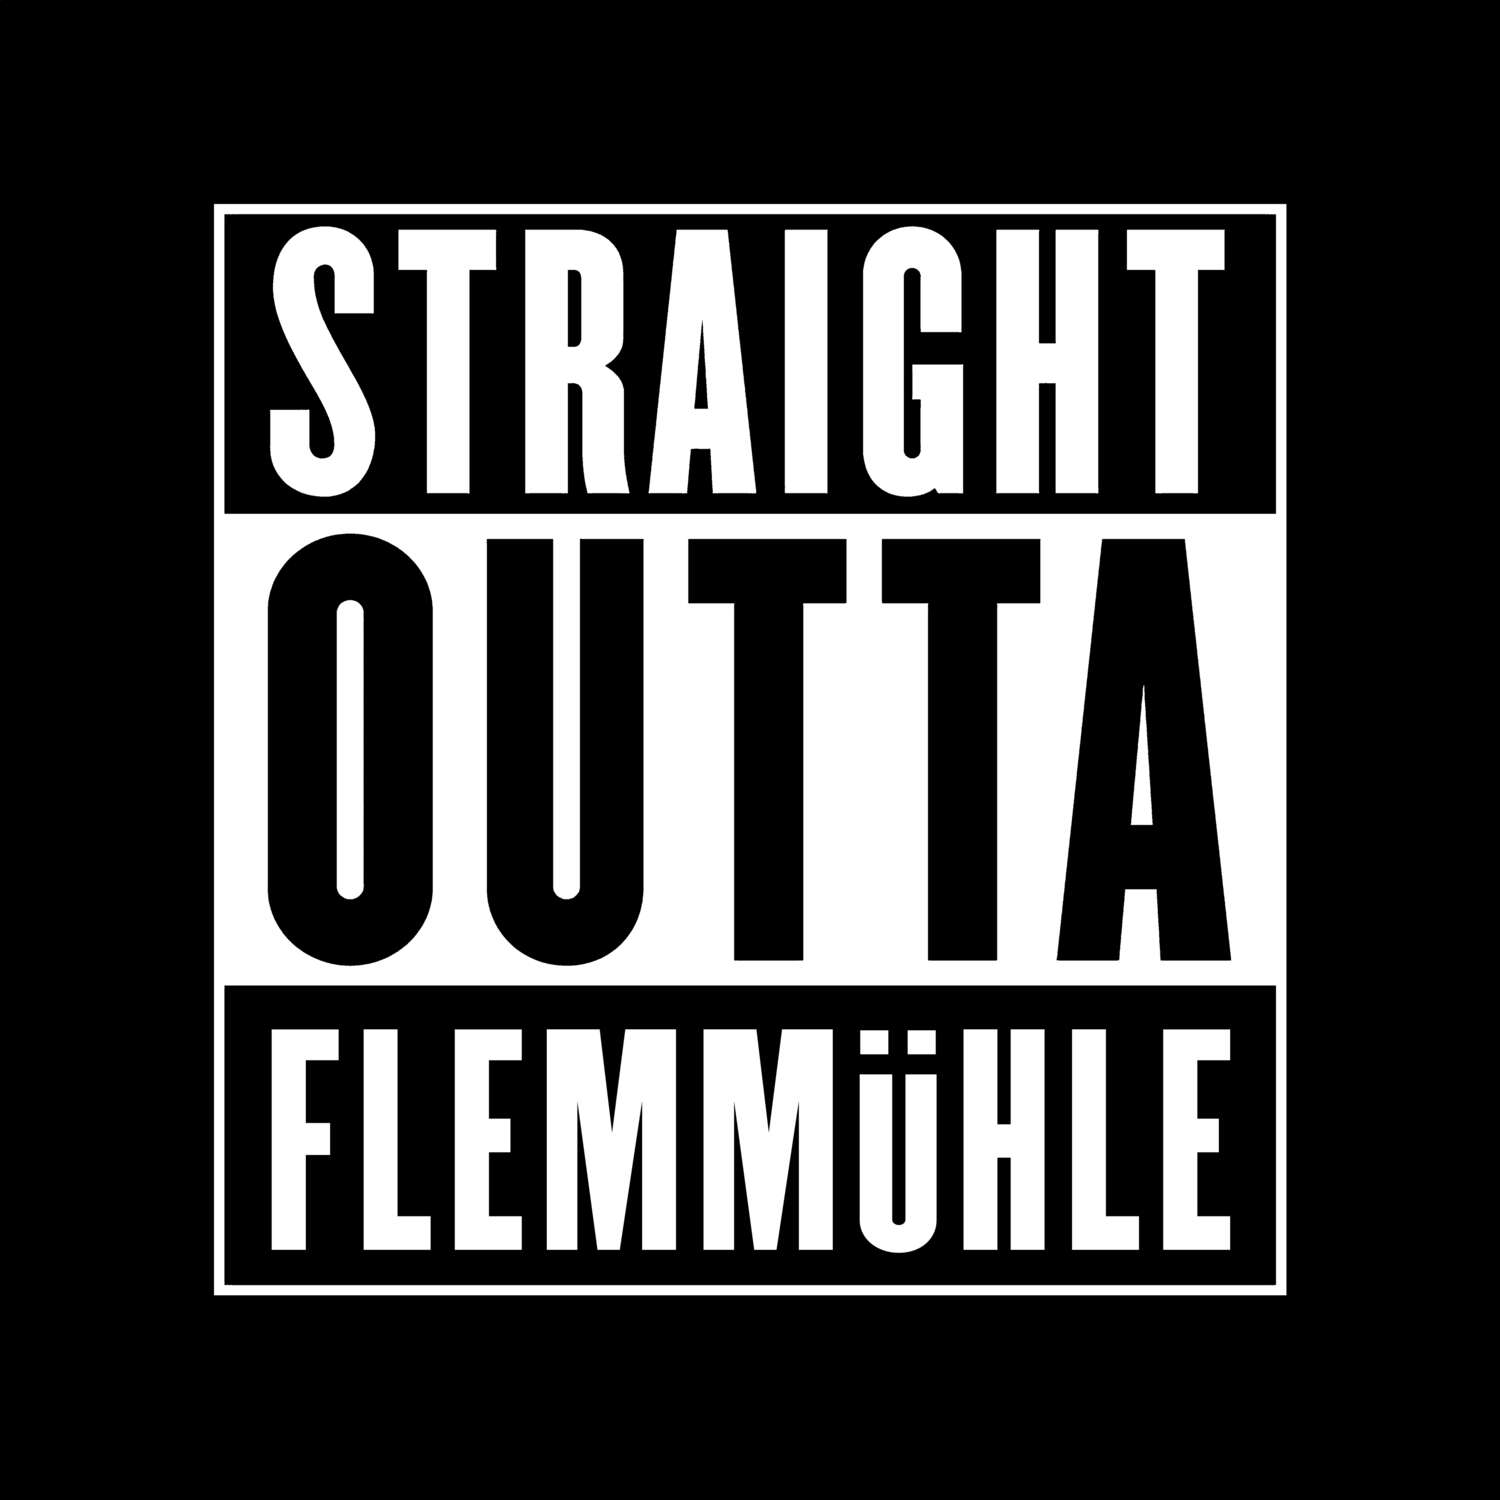 Flemmühle T-Shirt »Straight Outta«